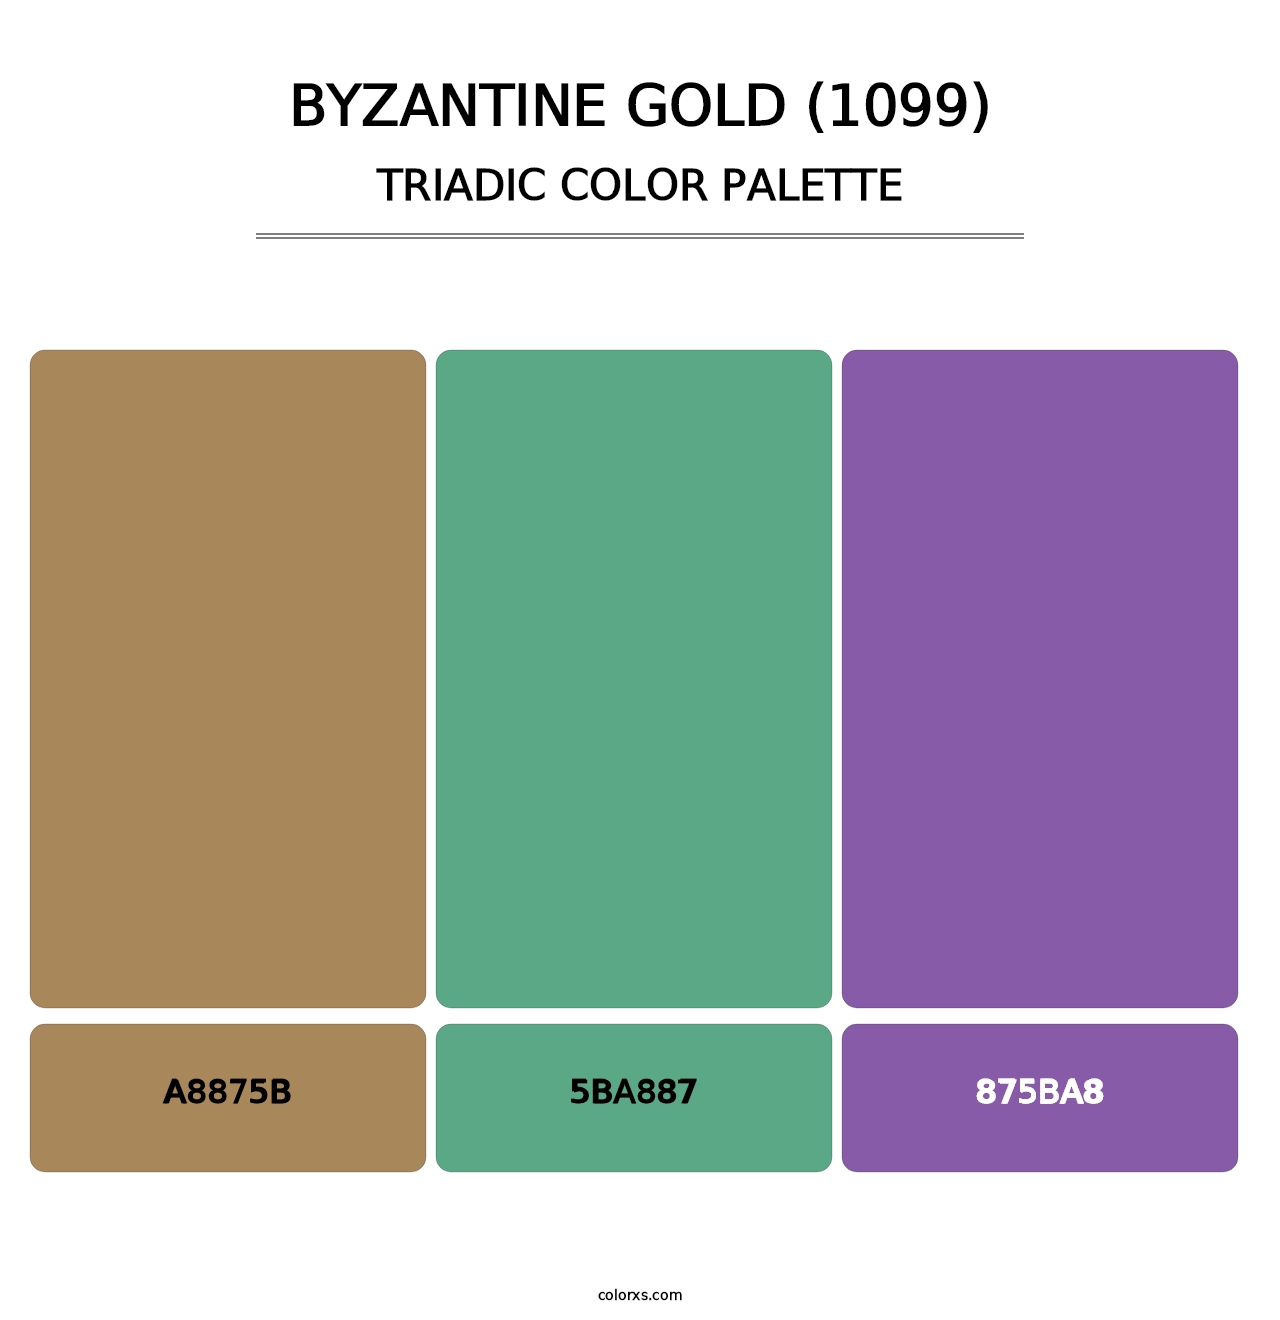 Byzantine Gold (1099) - Triadic Color Palette